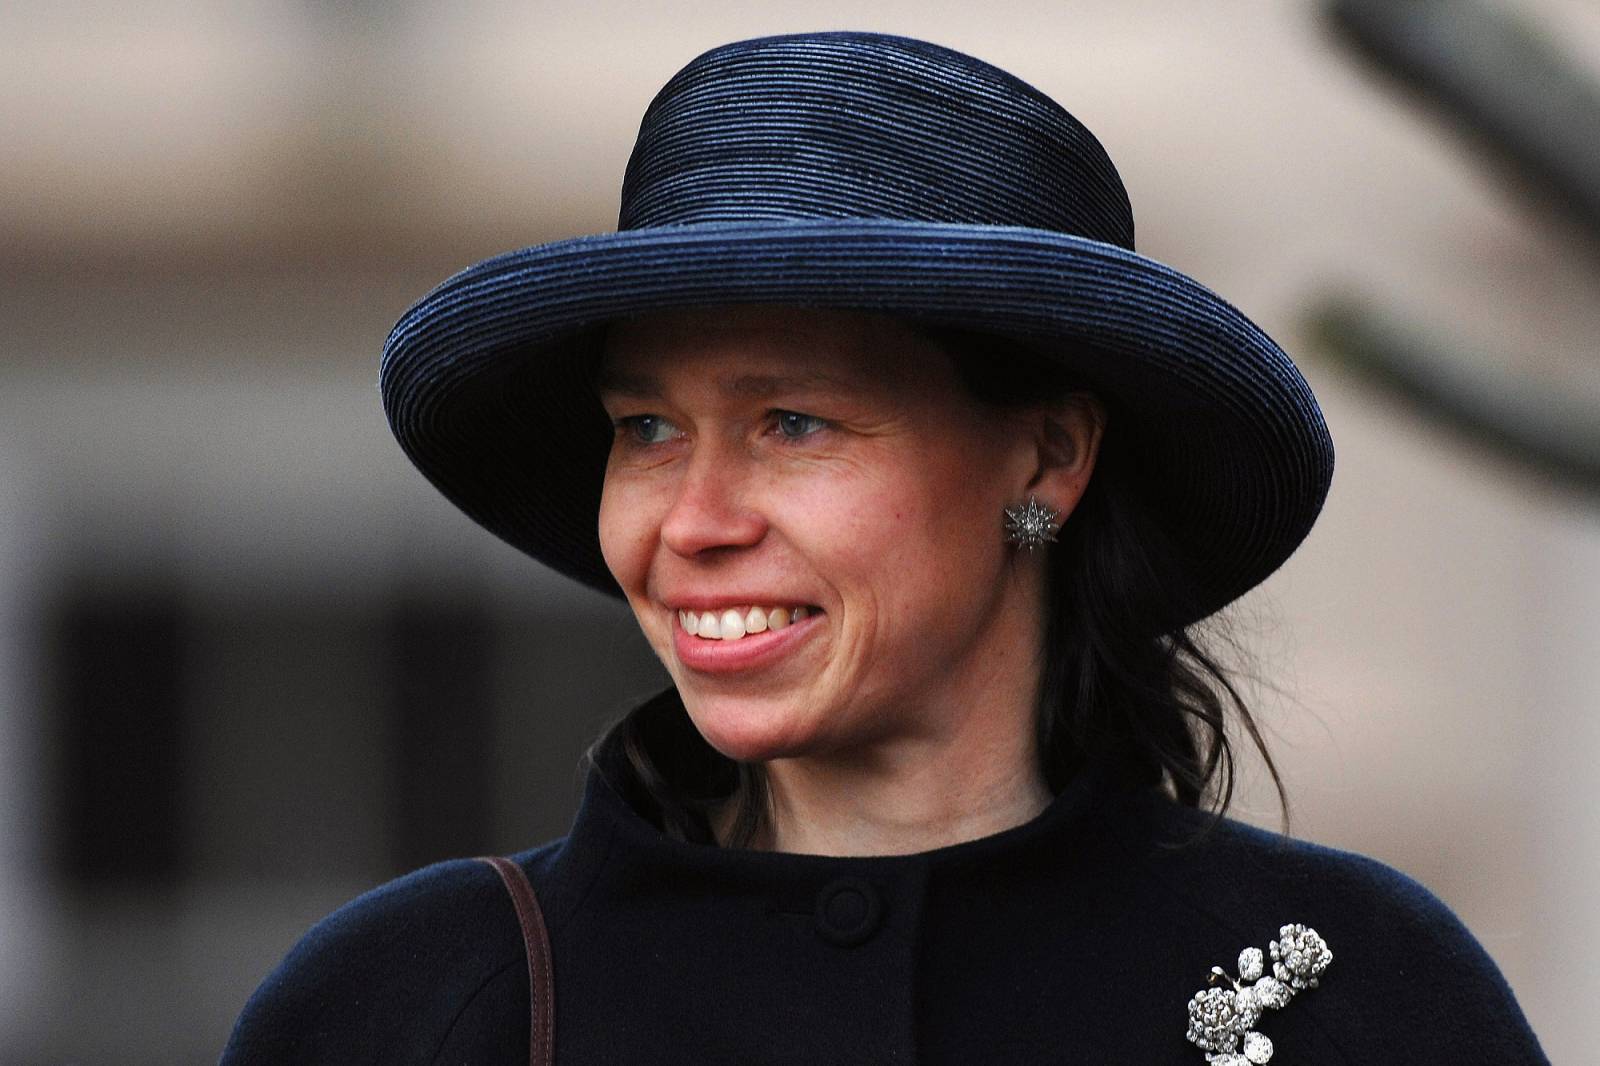 Sarah Chatto (Fot. Anwar Hussein/WireImage, Getty Images)